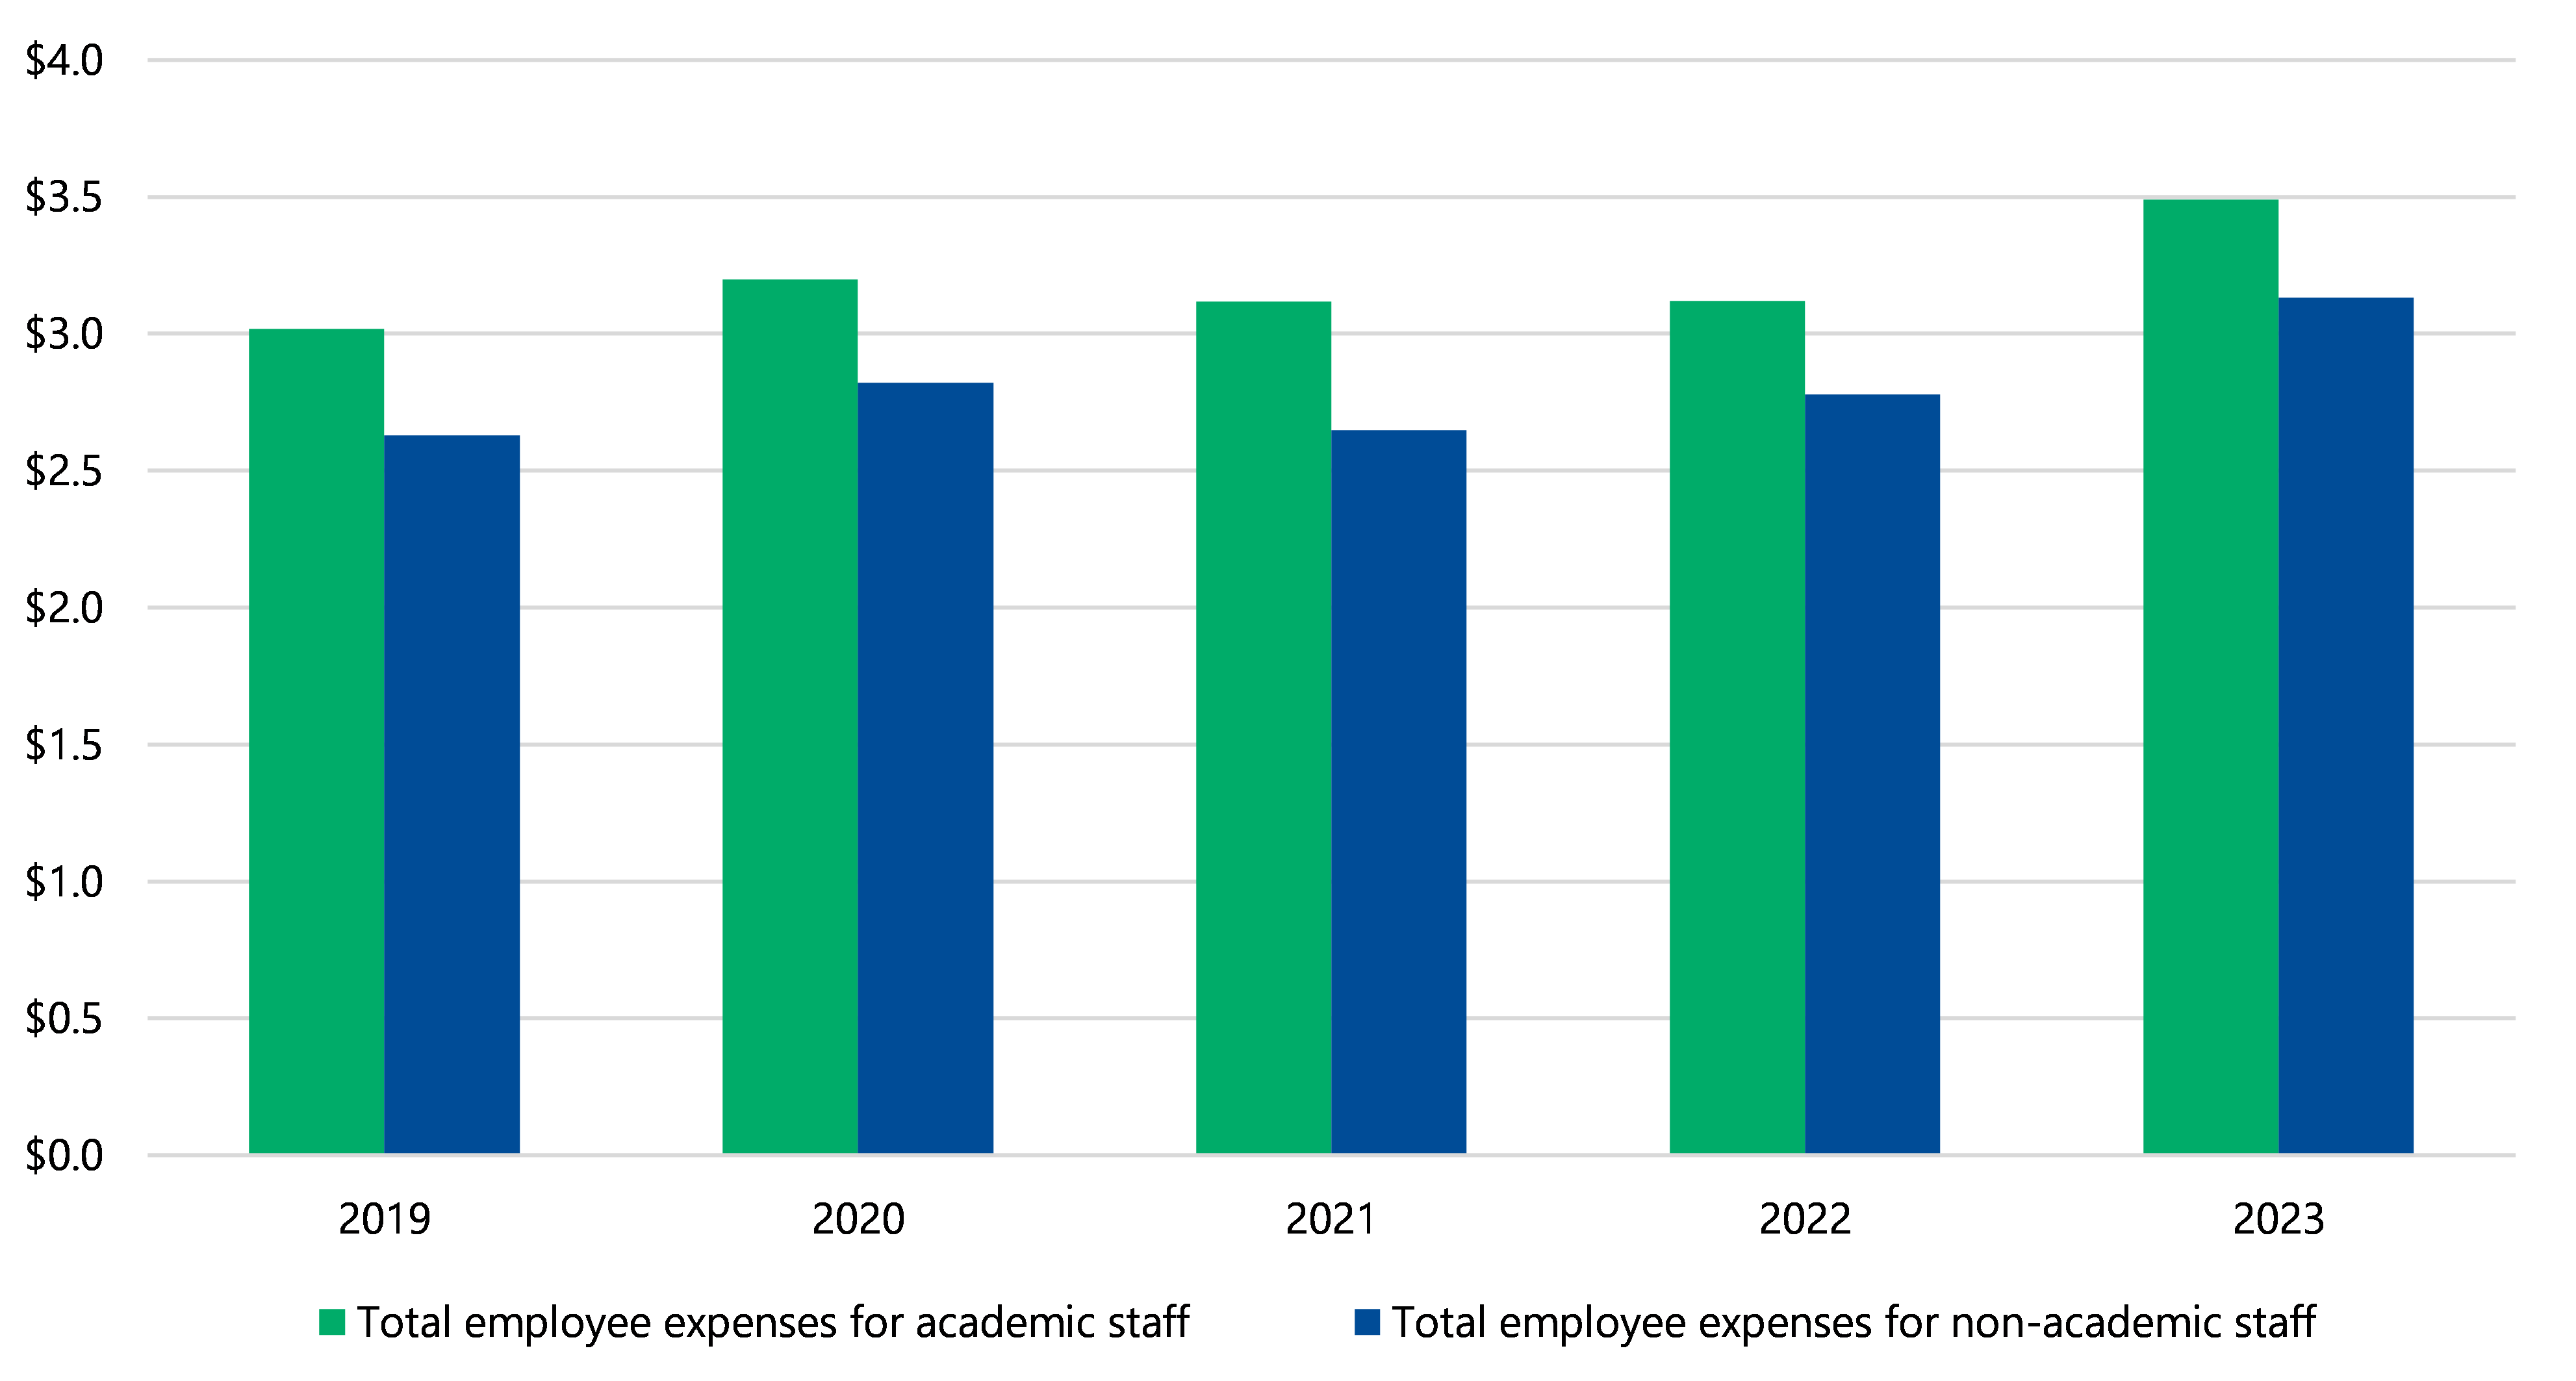 Figure 9 is a bar chart that shows universities’ expenditure on academic and non-academic staff from 2019 to 2023. Total employee expenses for academic staff increased from about $3.0 billion in 2019 to about $3.5 billion in 2023. Total employee expenses for non-academic staff increased from between $2.5 billion and $3 billion in 2019 to between $3 billion and $3.5 billion in 2023.